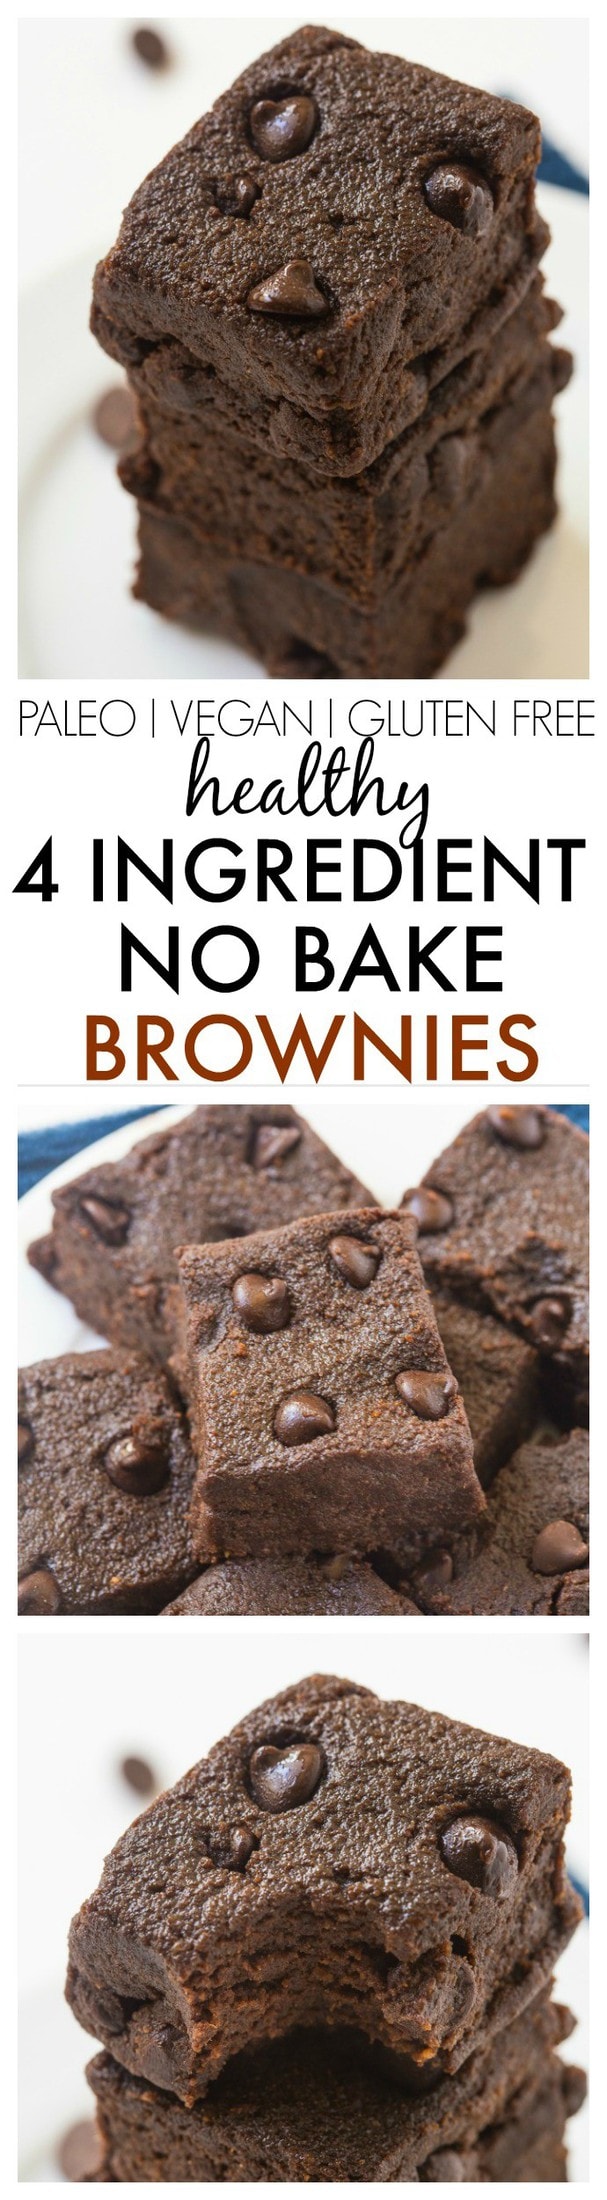 Healthy 4 Ingredient No Bake Brownies- SO moist, gooey and fudgy but with NO butter, oil, sugar, eggs or odd ingredients and ready in no time! {vegan, gluten free, paleo recipe}- thebigmansworld.com